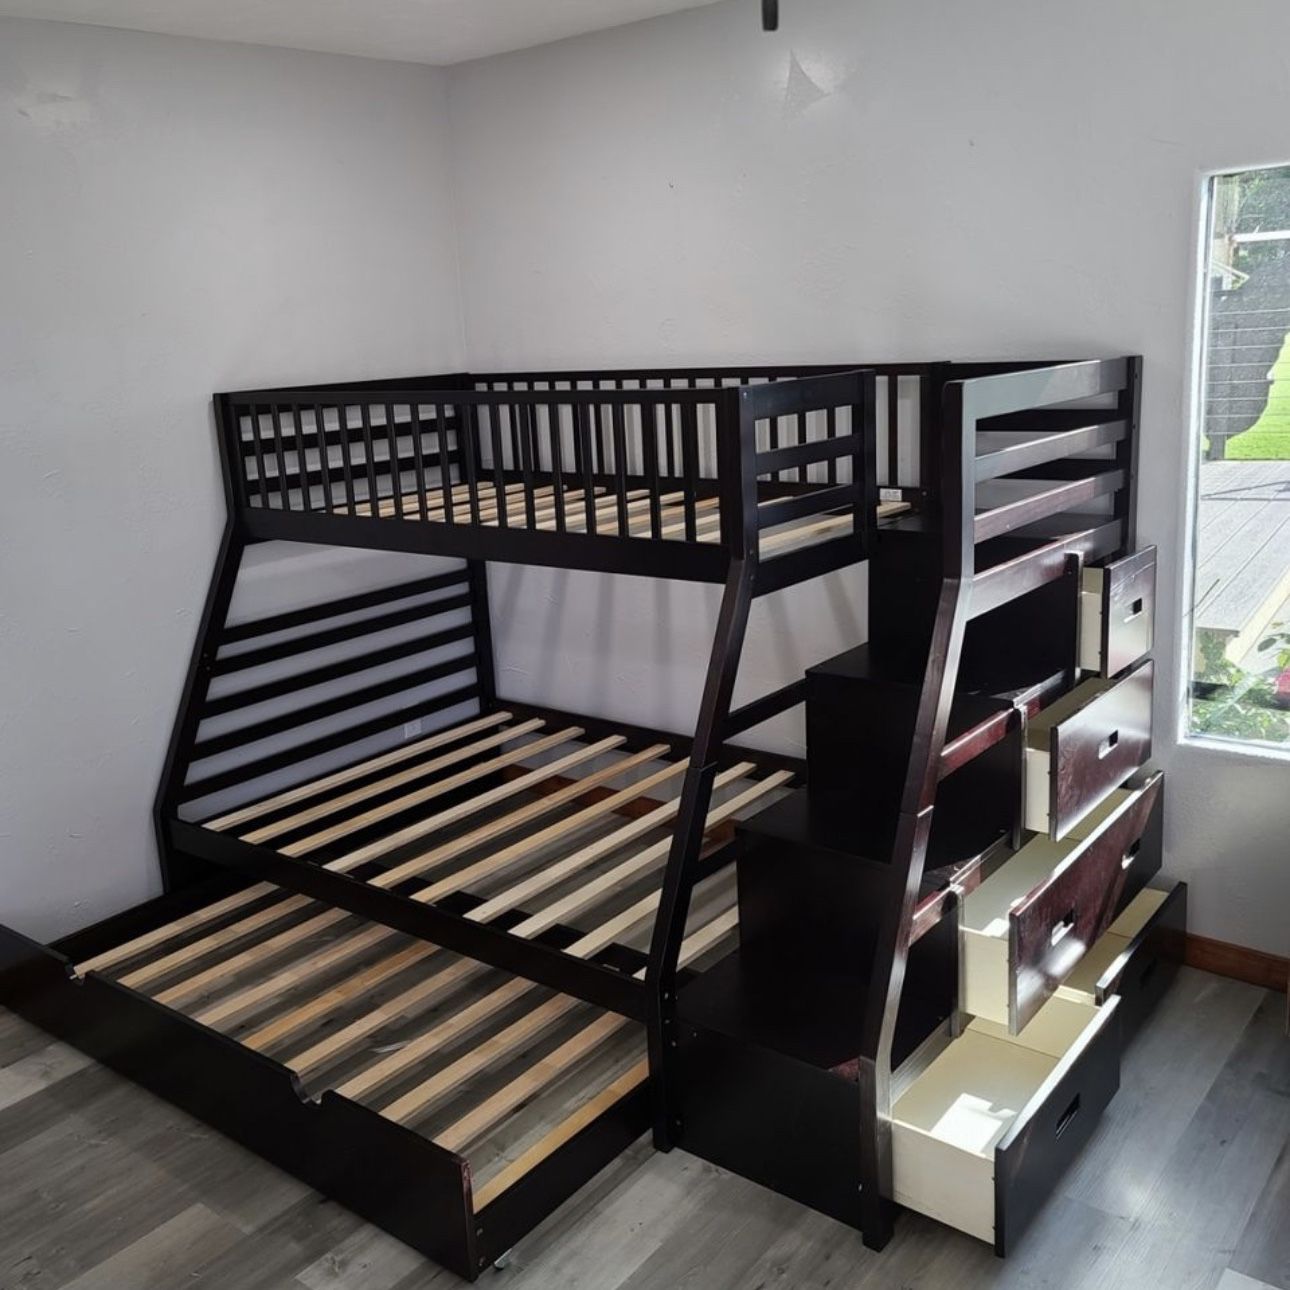 Bunk Bed Set 9166611073 Call Today For Approval On Payment Option 0% Interest No Down Payment Same Day Delivery 